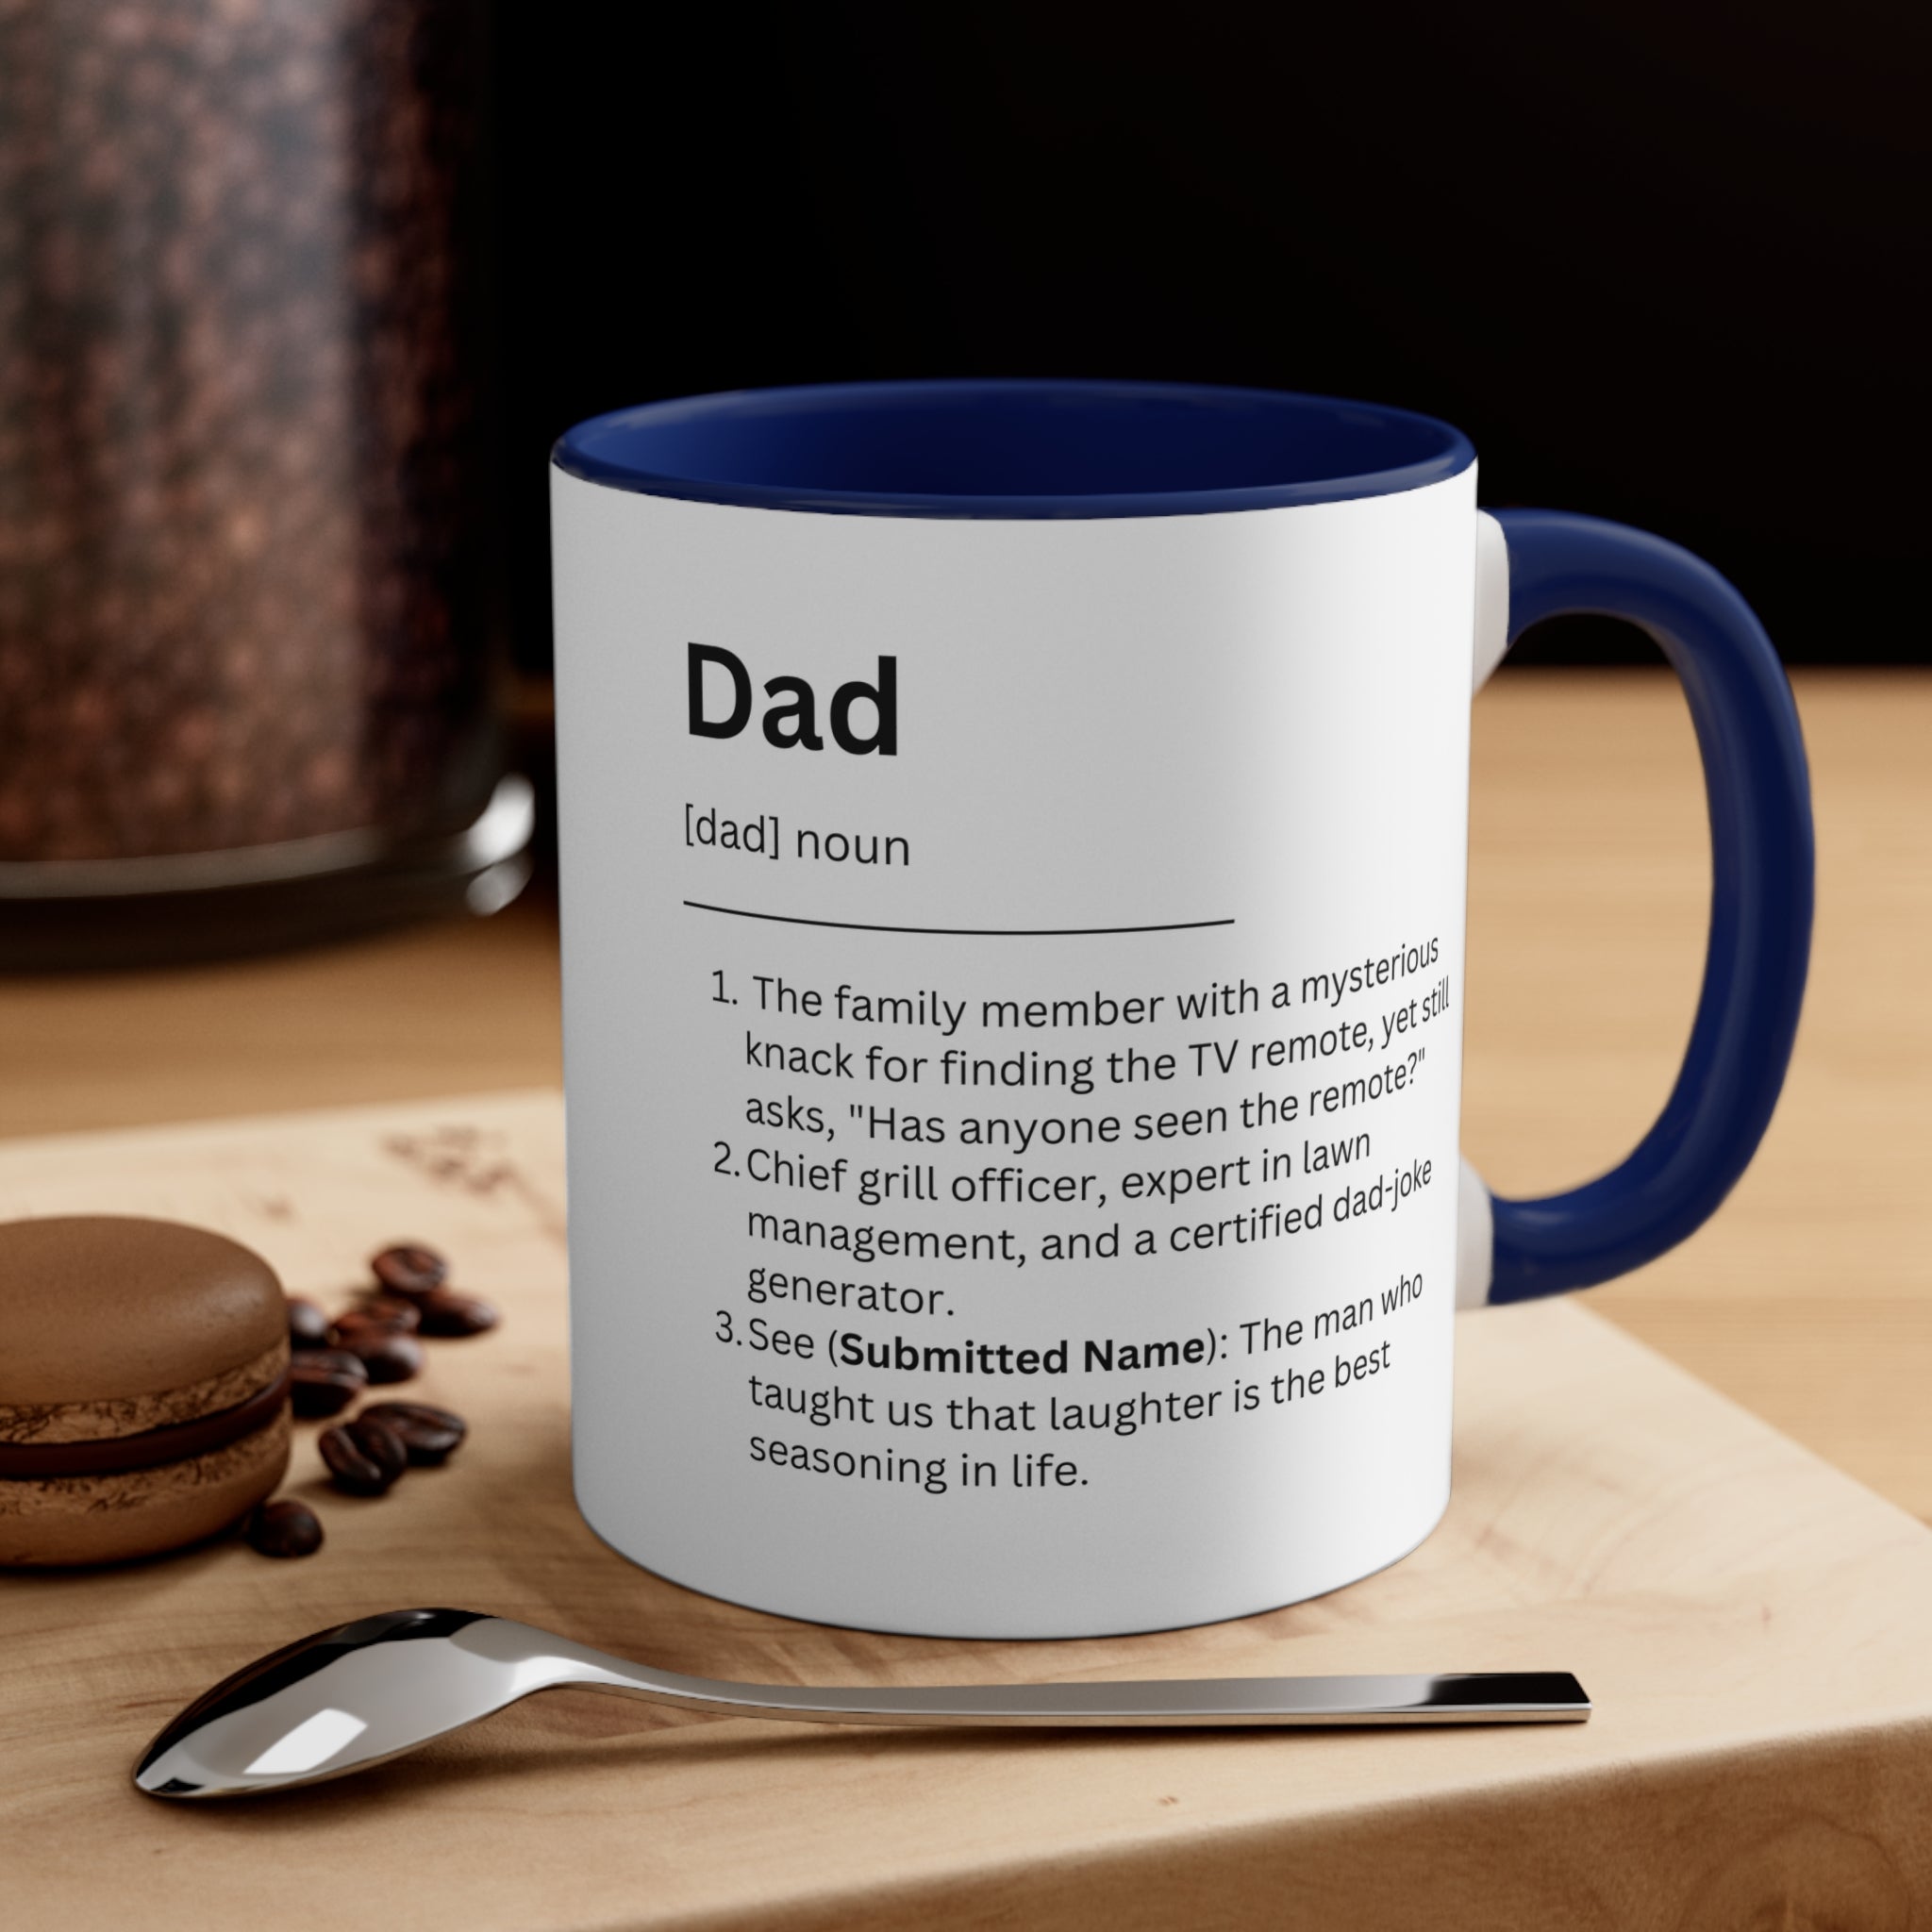 "Funny Dad Dictionary Definition Mug - Personalized Name Accent - 11oz Coffee Cup for Hilarious Dads Who Need to Relax and Laugh with Loved Ones